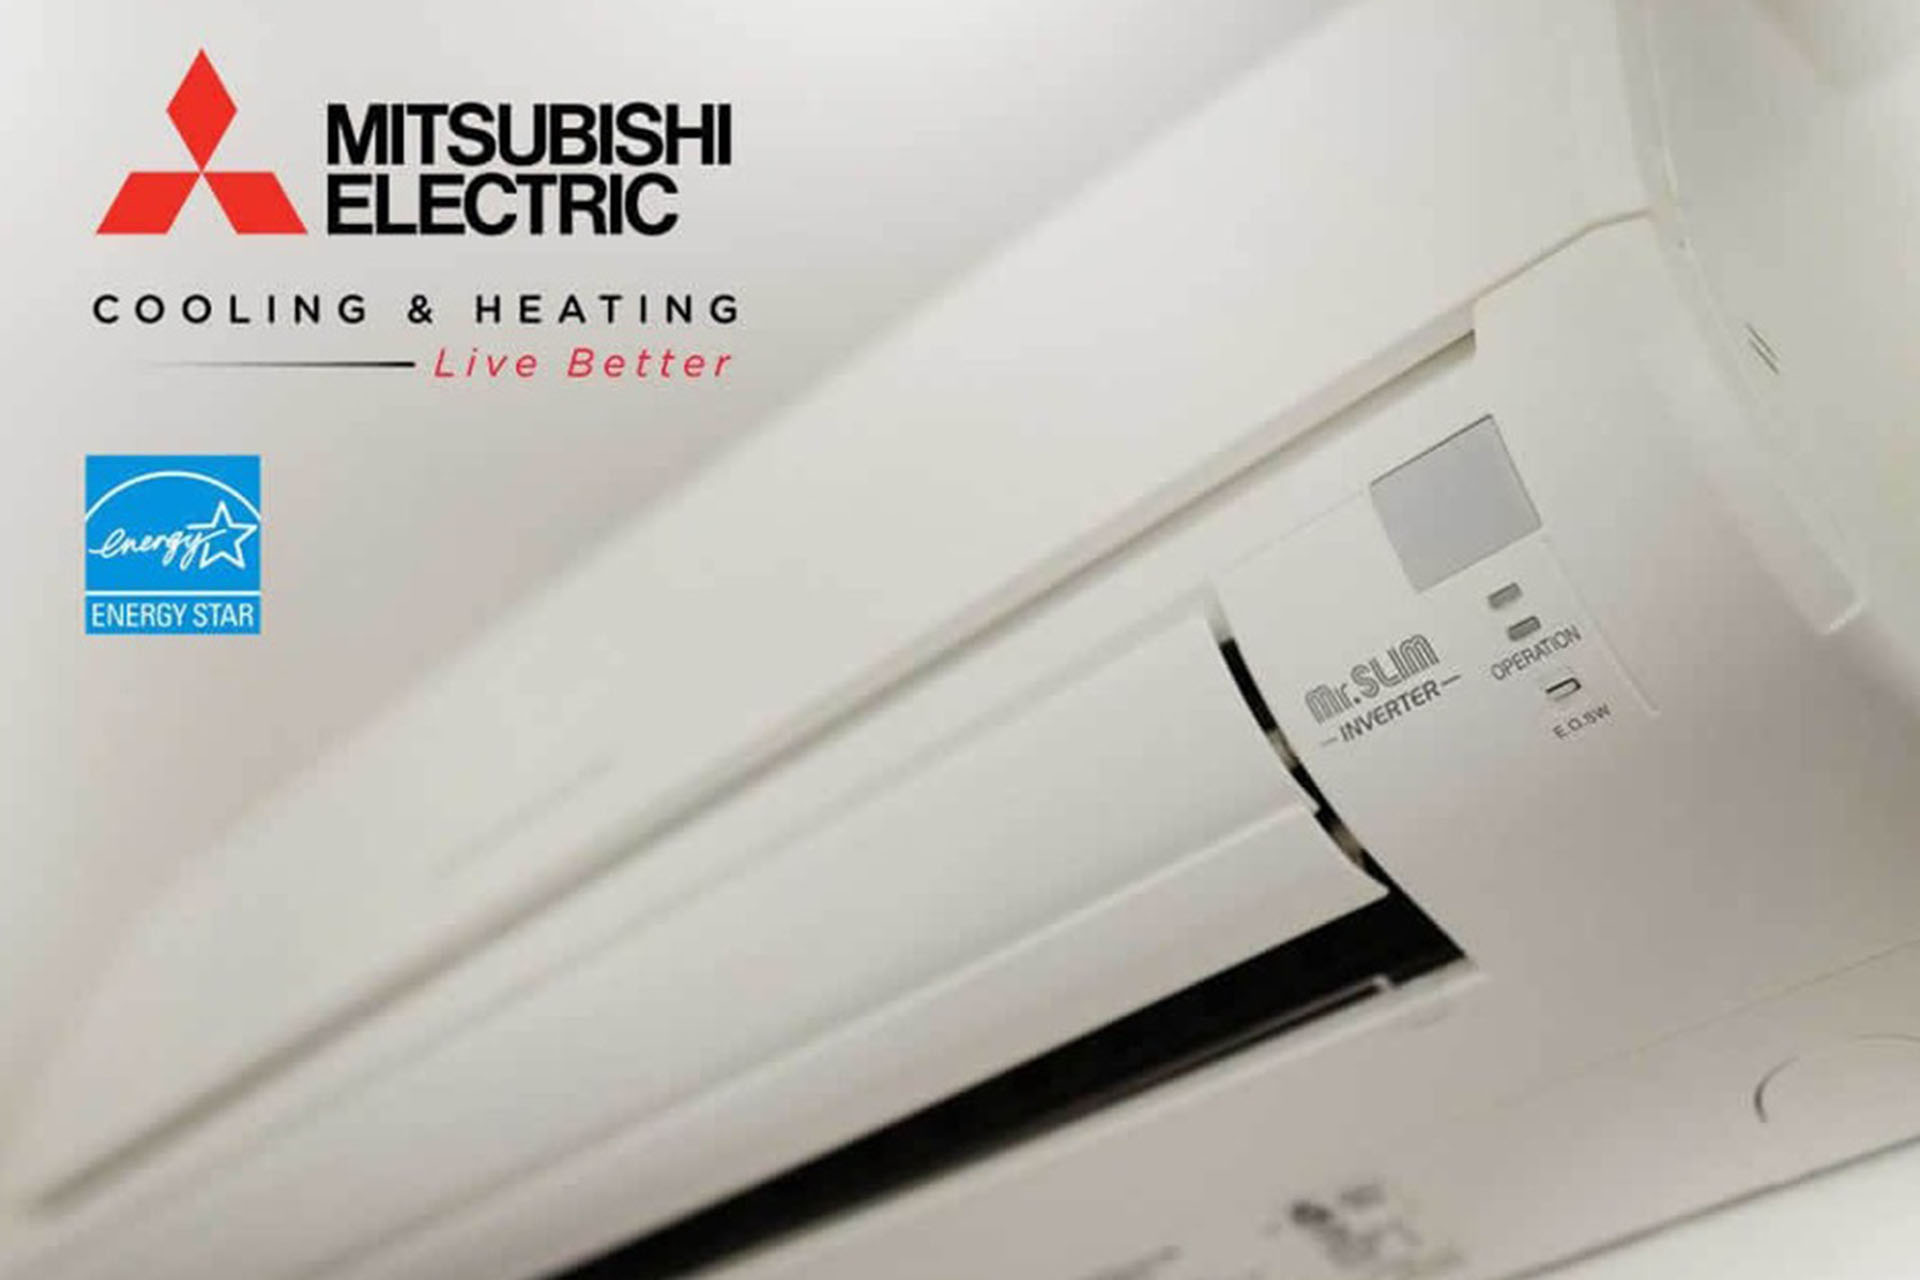 Mitsubishi ductless air conditioning system